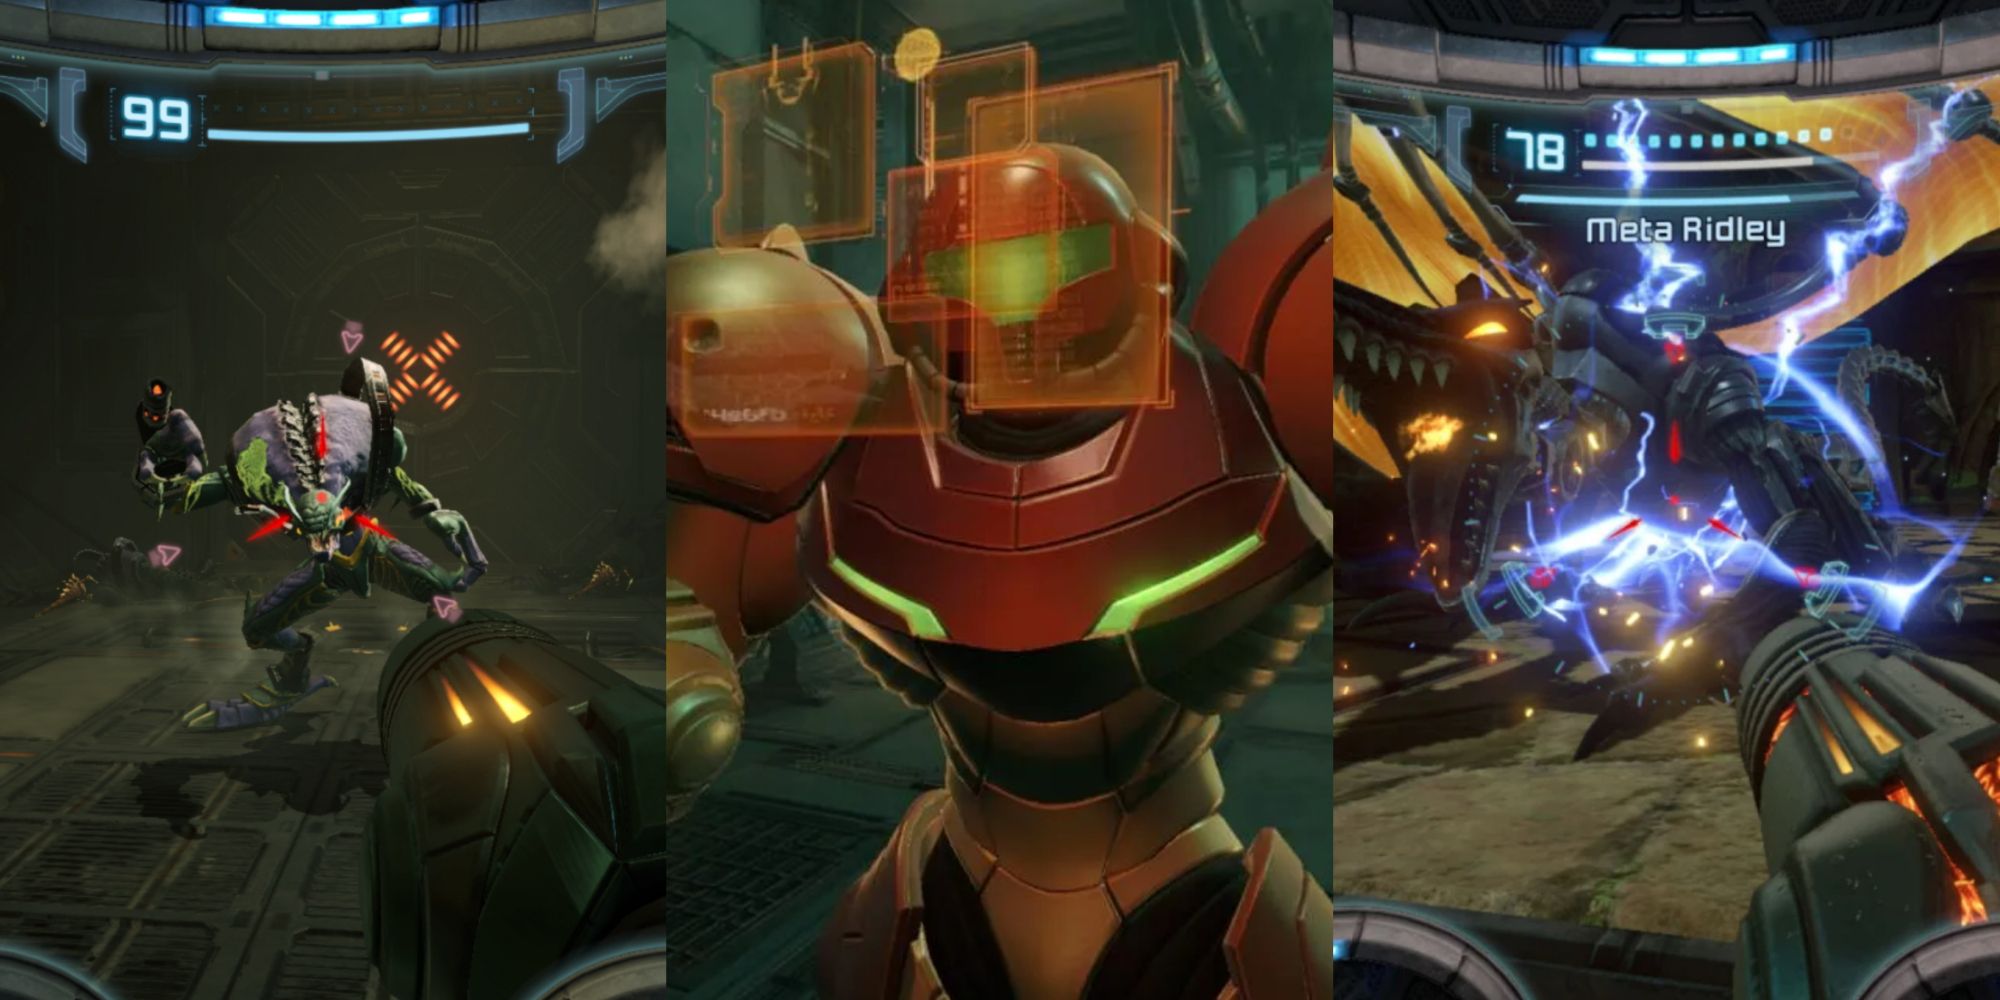 A collage with Samus aiming at two enemies and a screenshot of her checking some information.